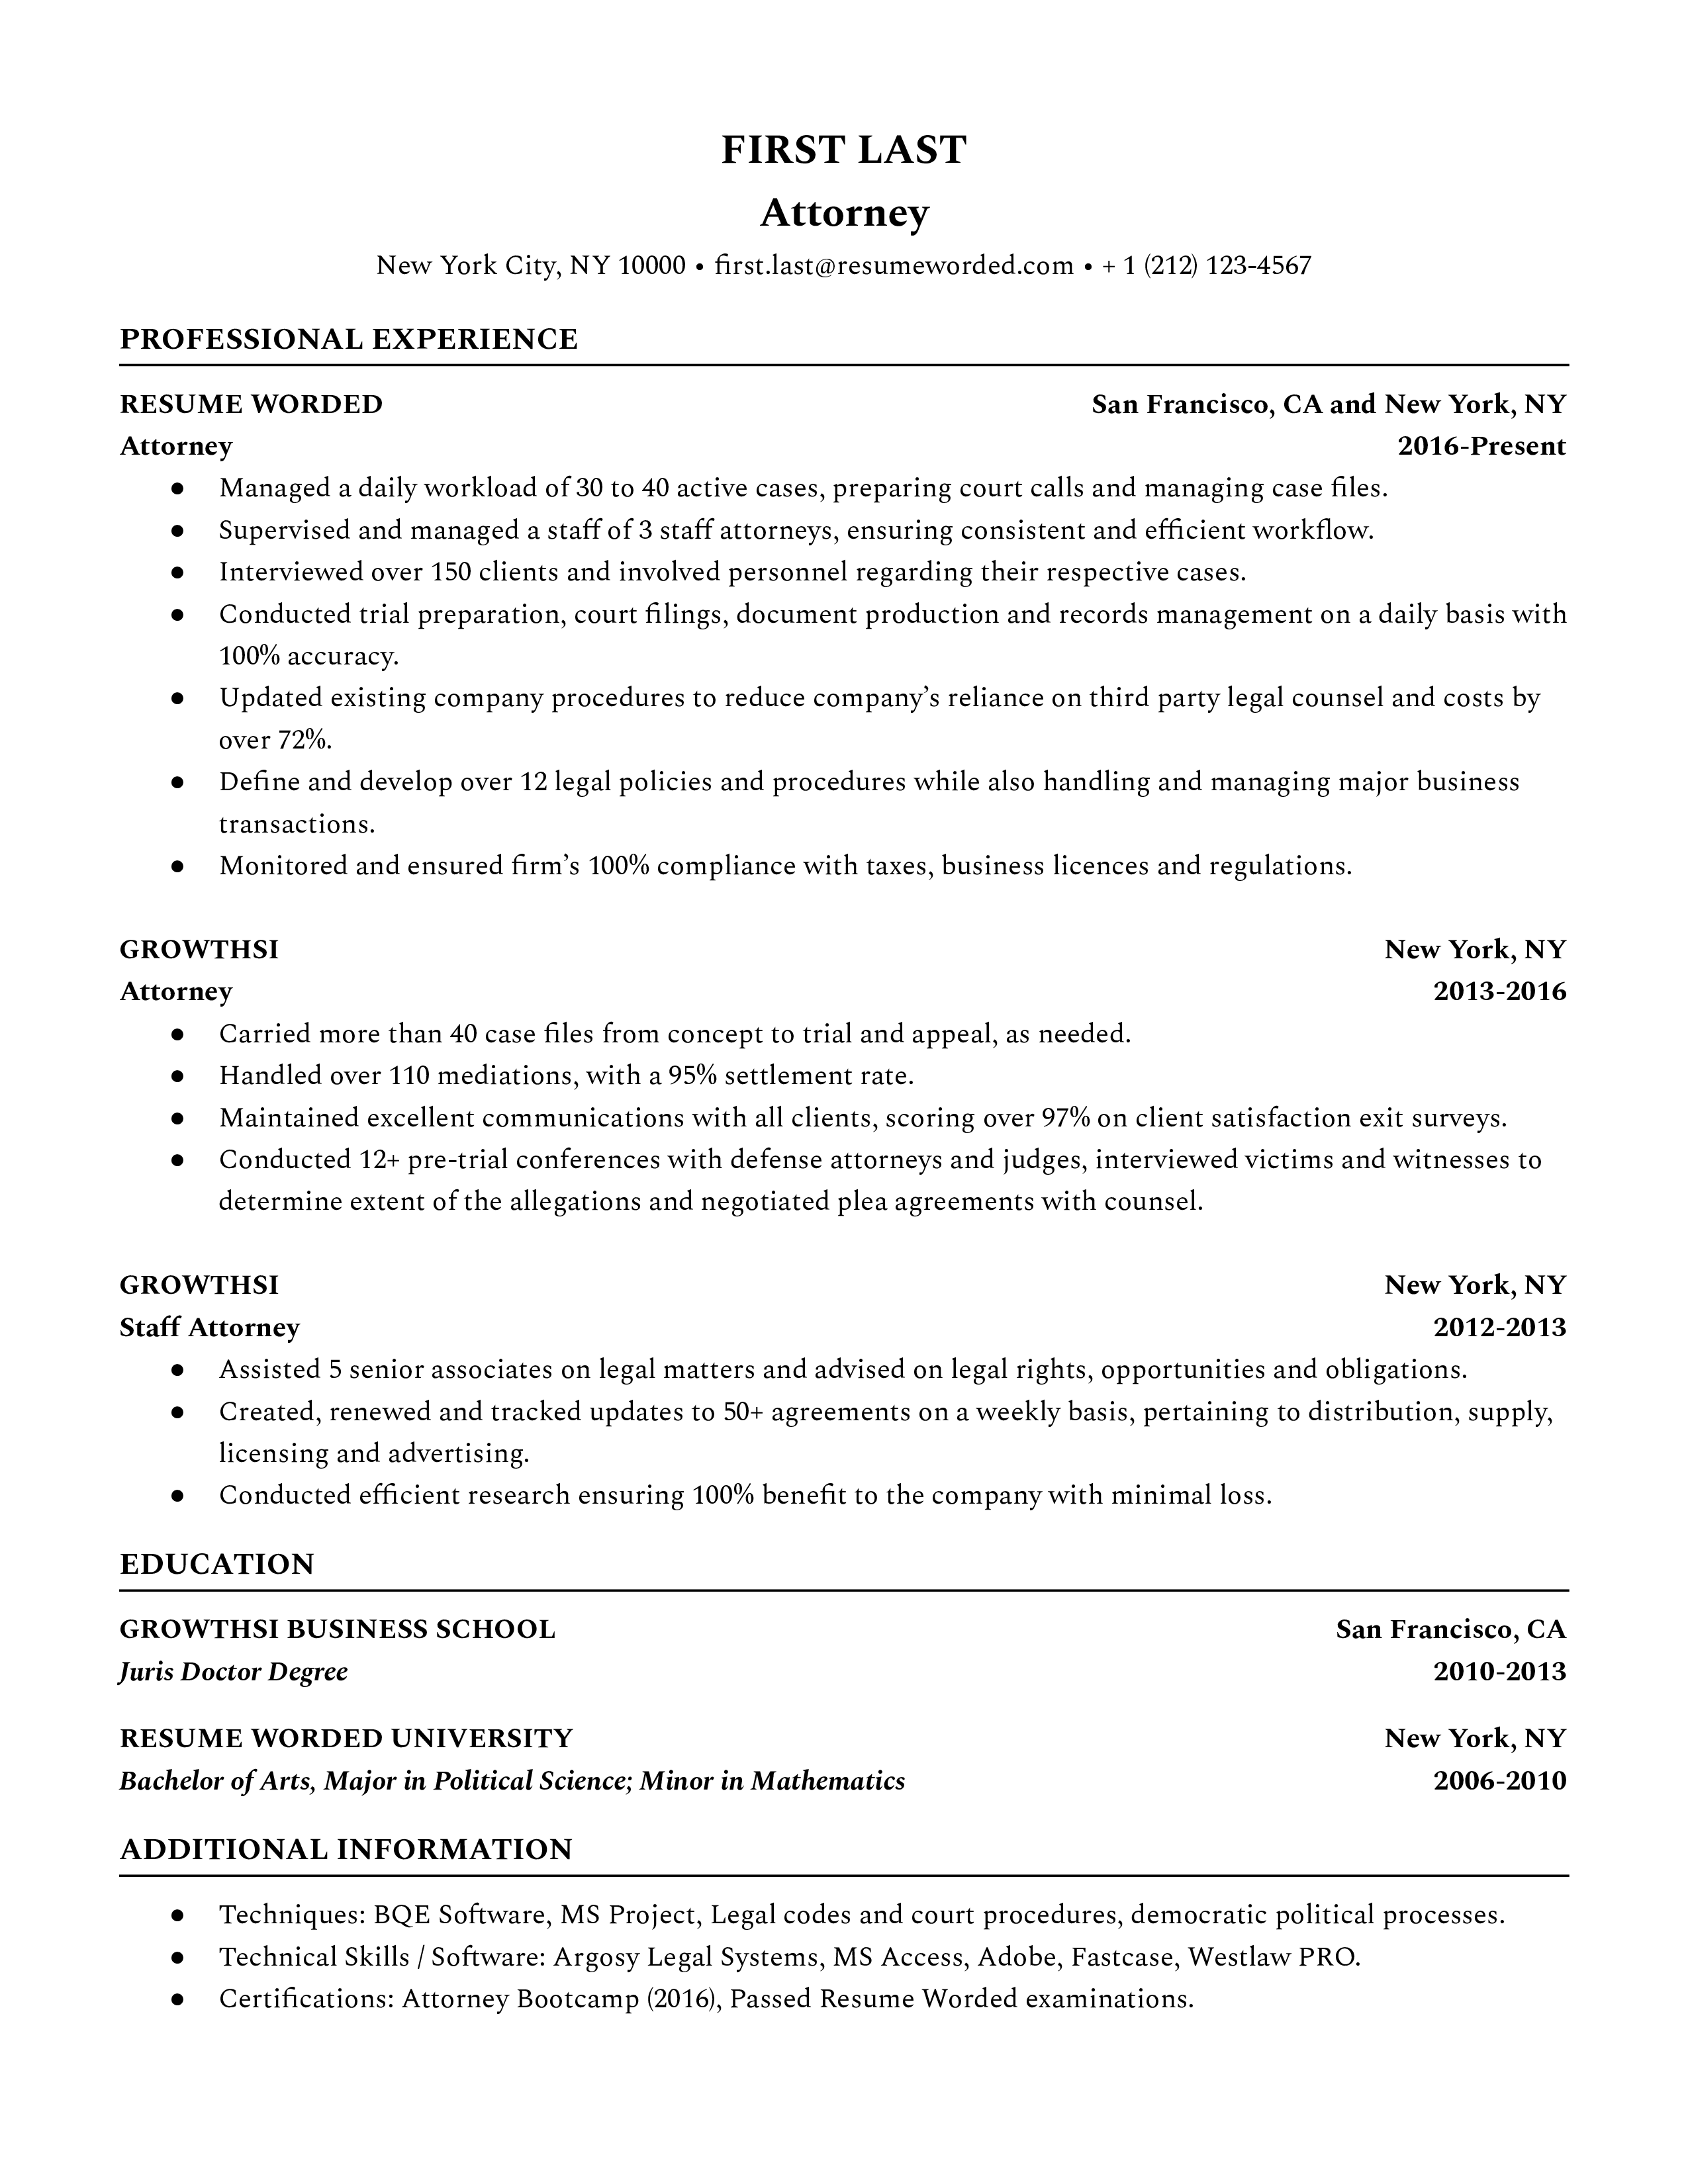 Attorney resume template example tailored to the job and using metrics to illustrate accomplishments